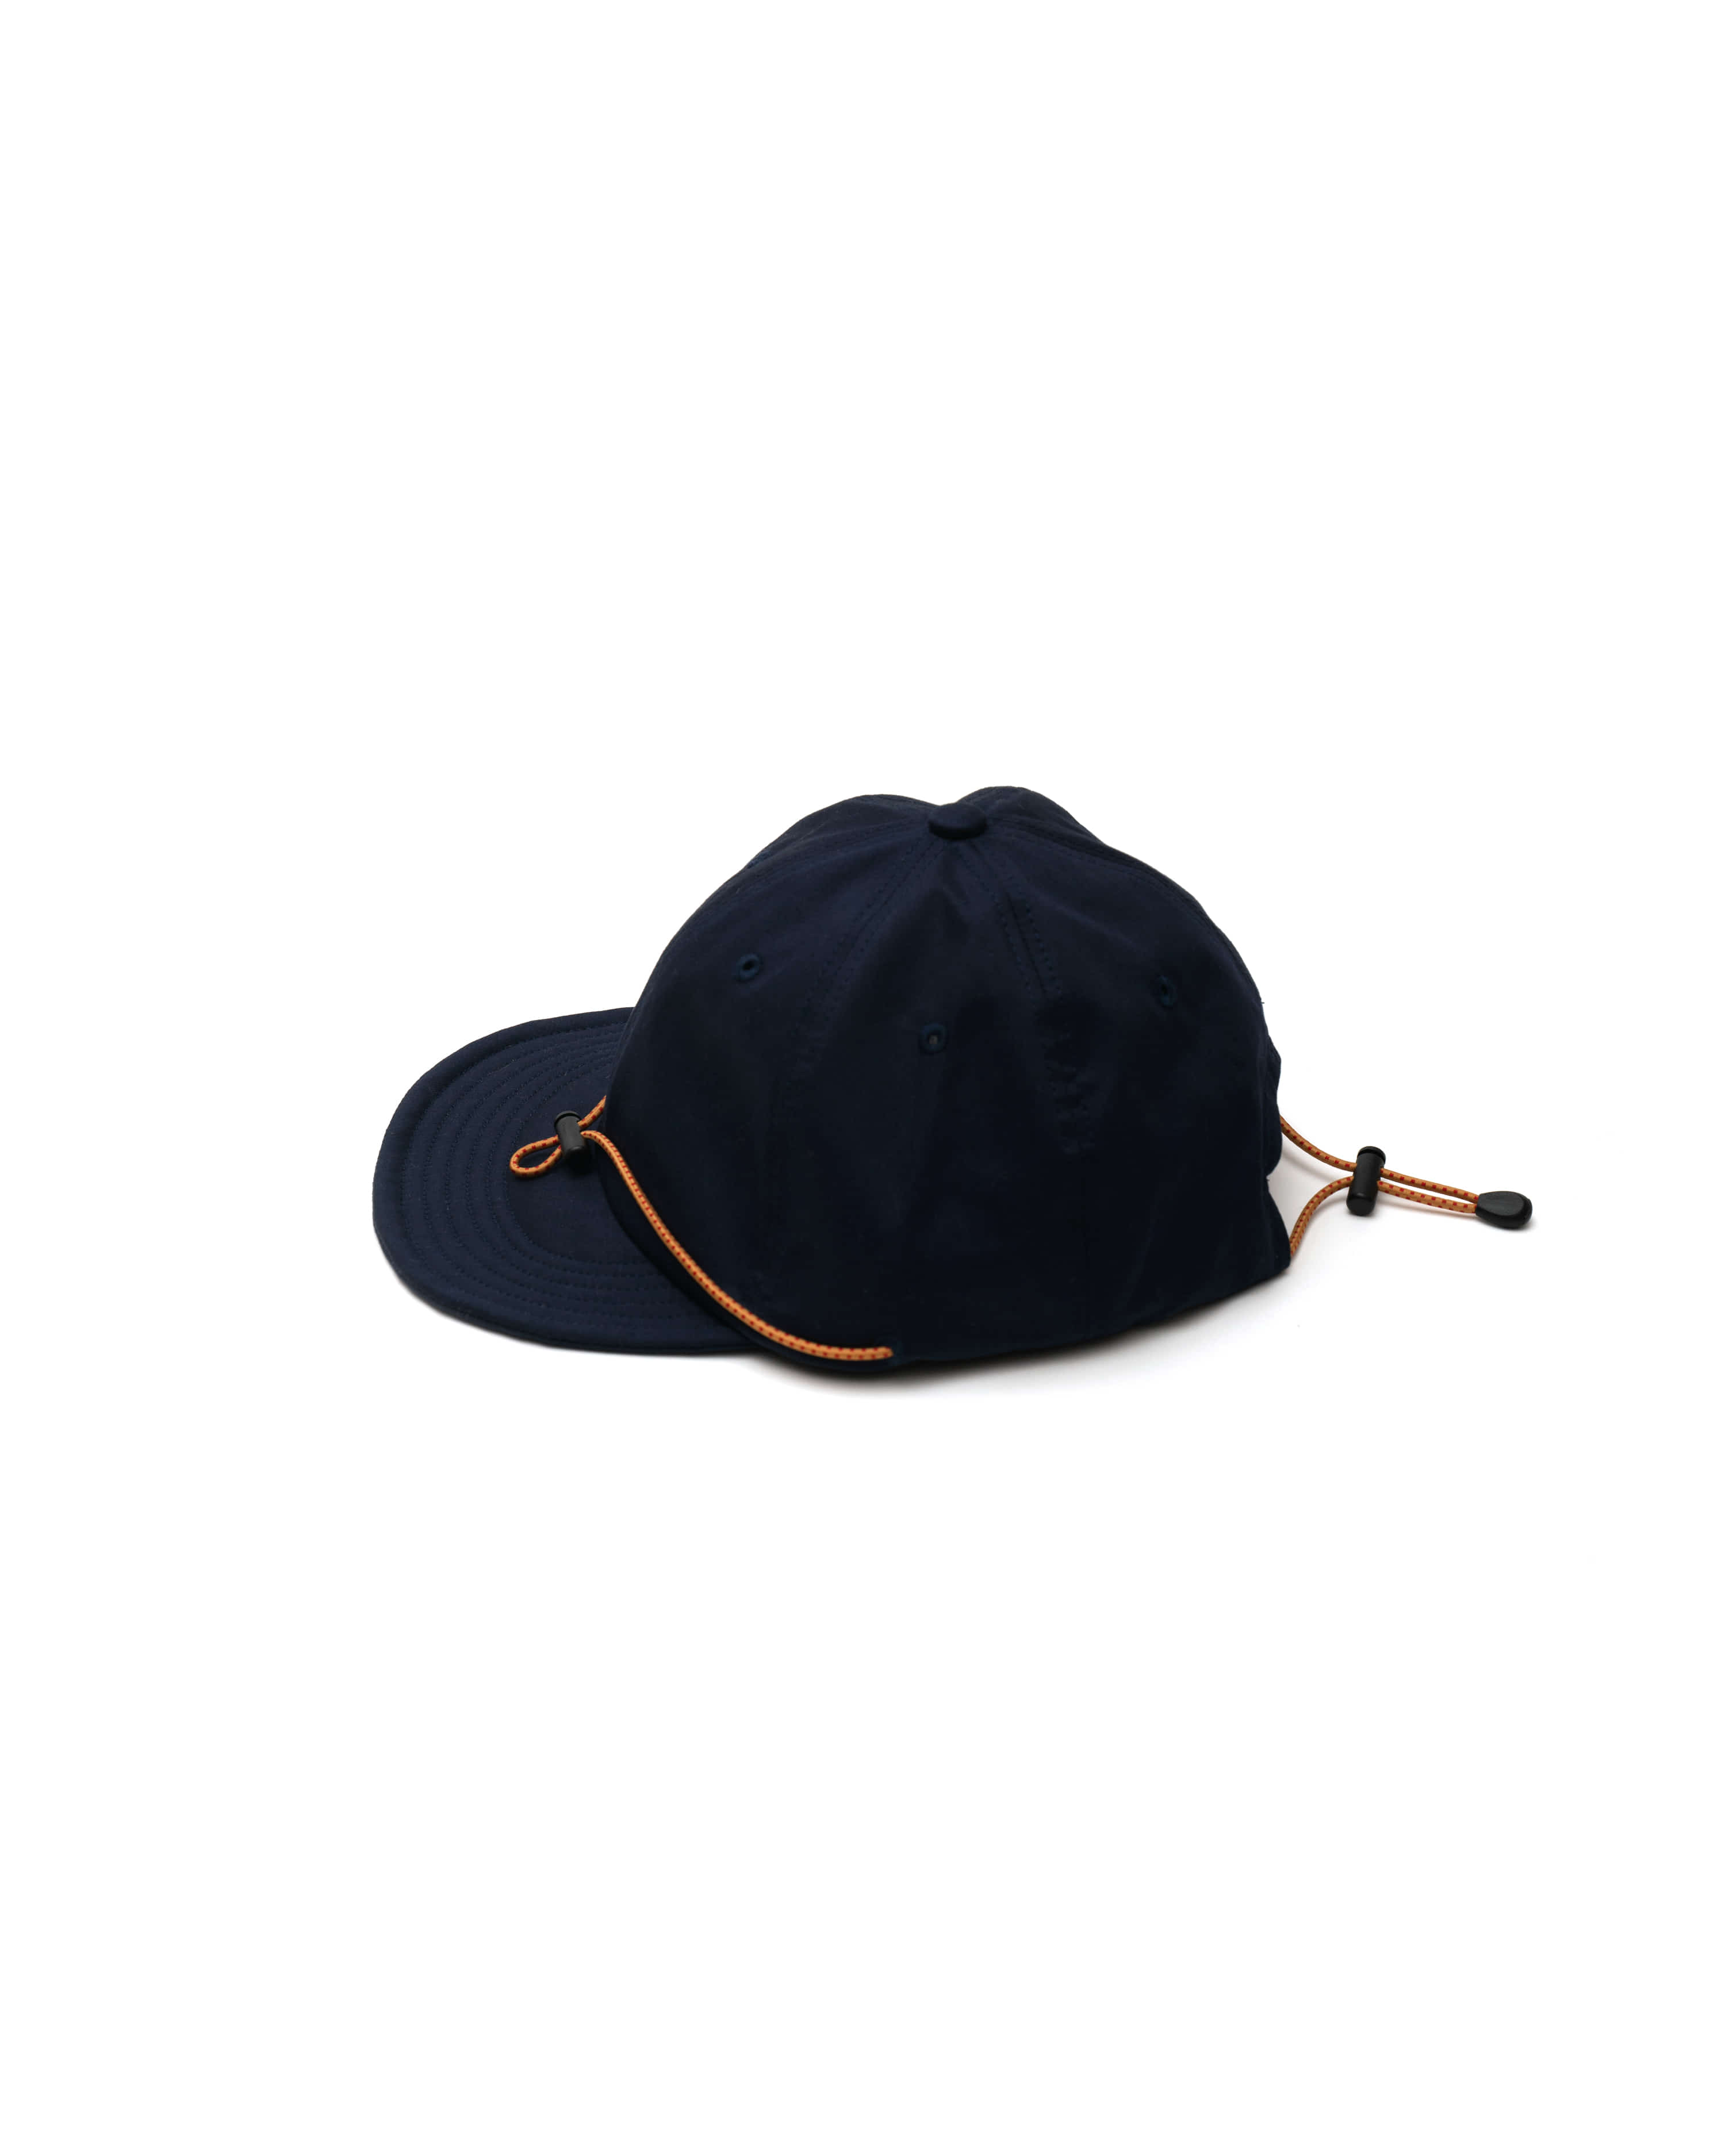 [out of stock] Town 1 - Navy